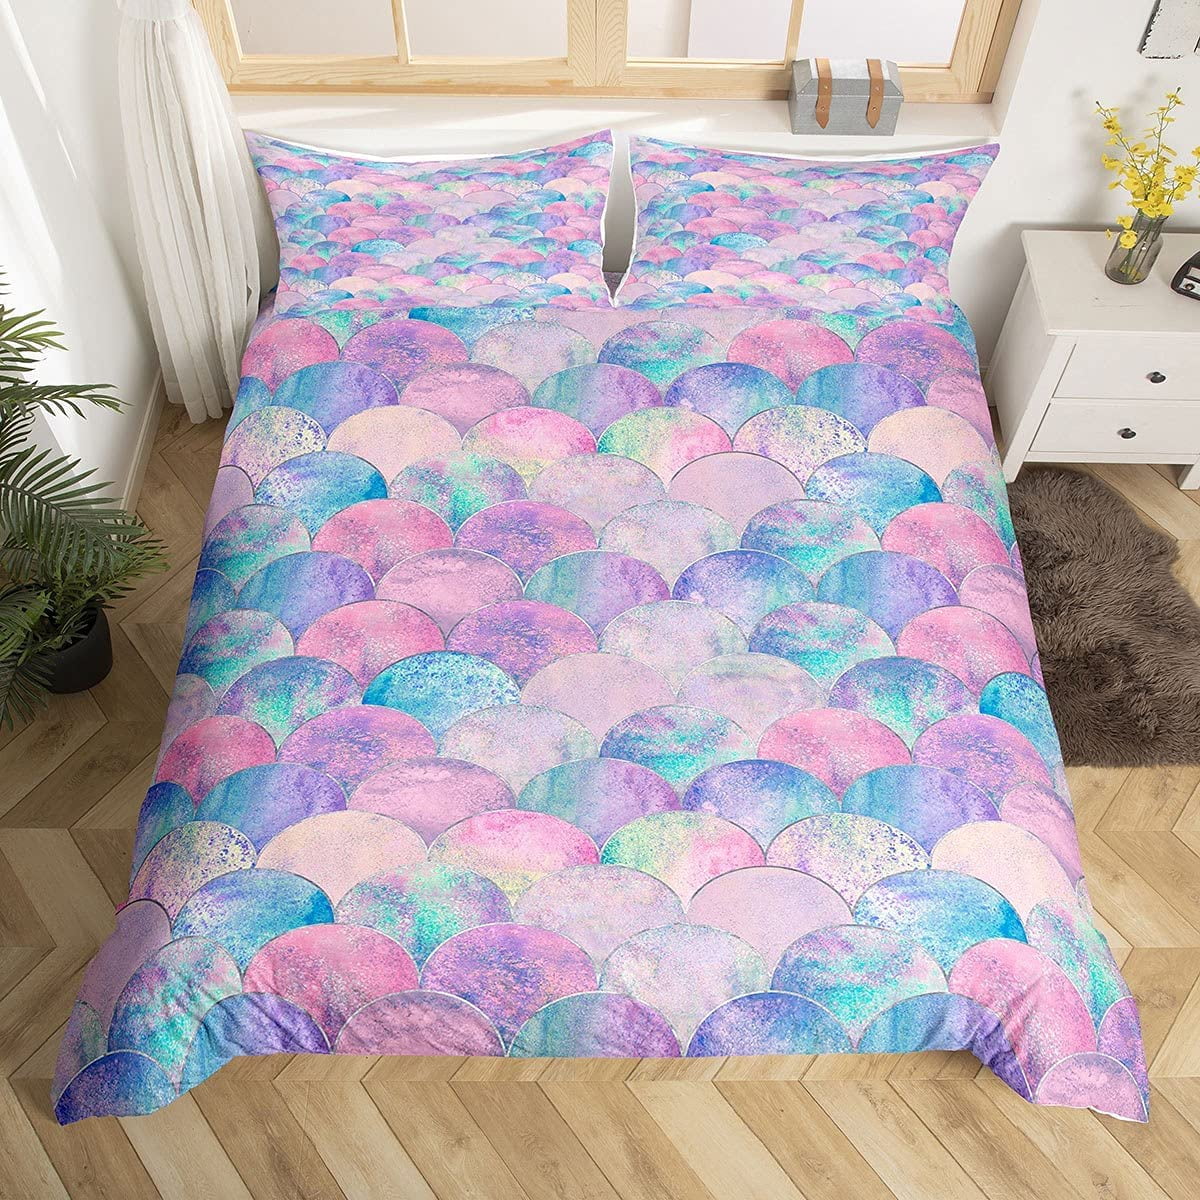 Colorful, Full 3 Pieces Fish Scales Bedding Colorful Mermaid Scale Bedding Rainbow Scales with Sparkles and Stars Quilt Cover Full for Kids Boys Girls 1 Duvet Cover 2 Pillowcases